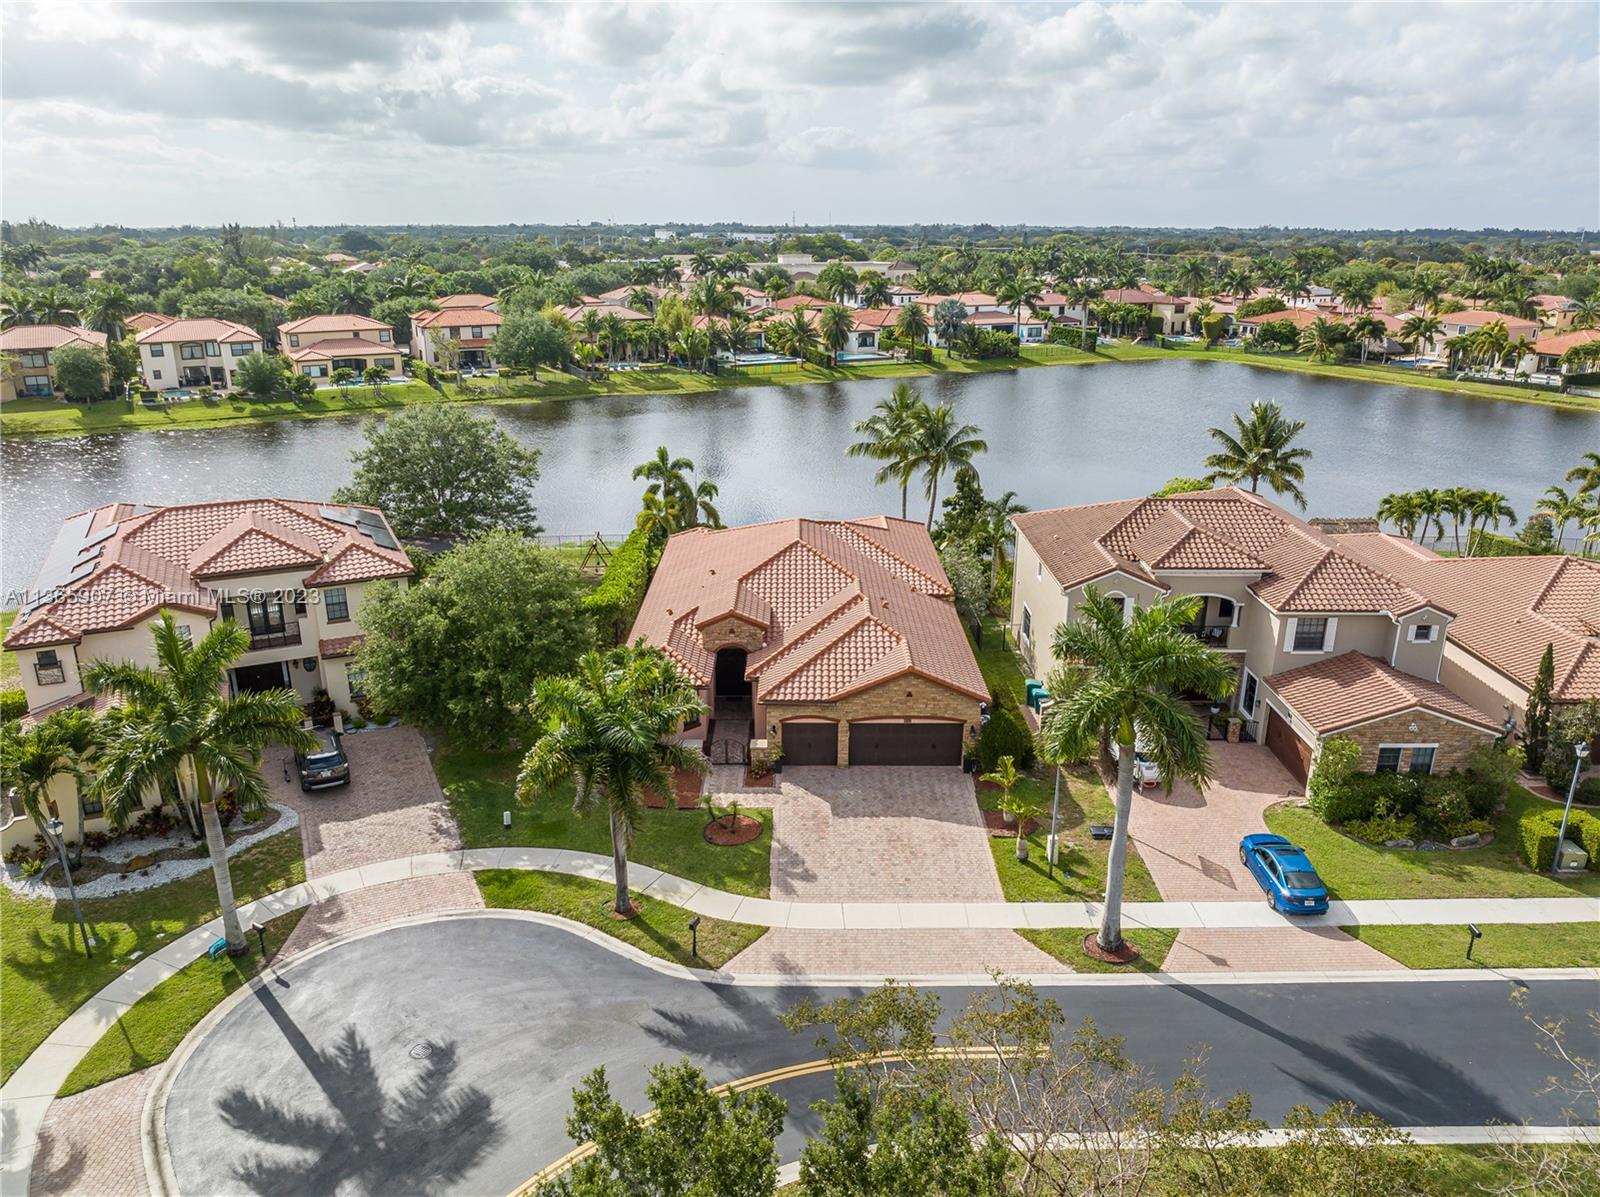 an aerial view of lake and residential houses with outdoor space and ocean view